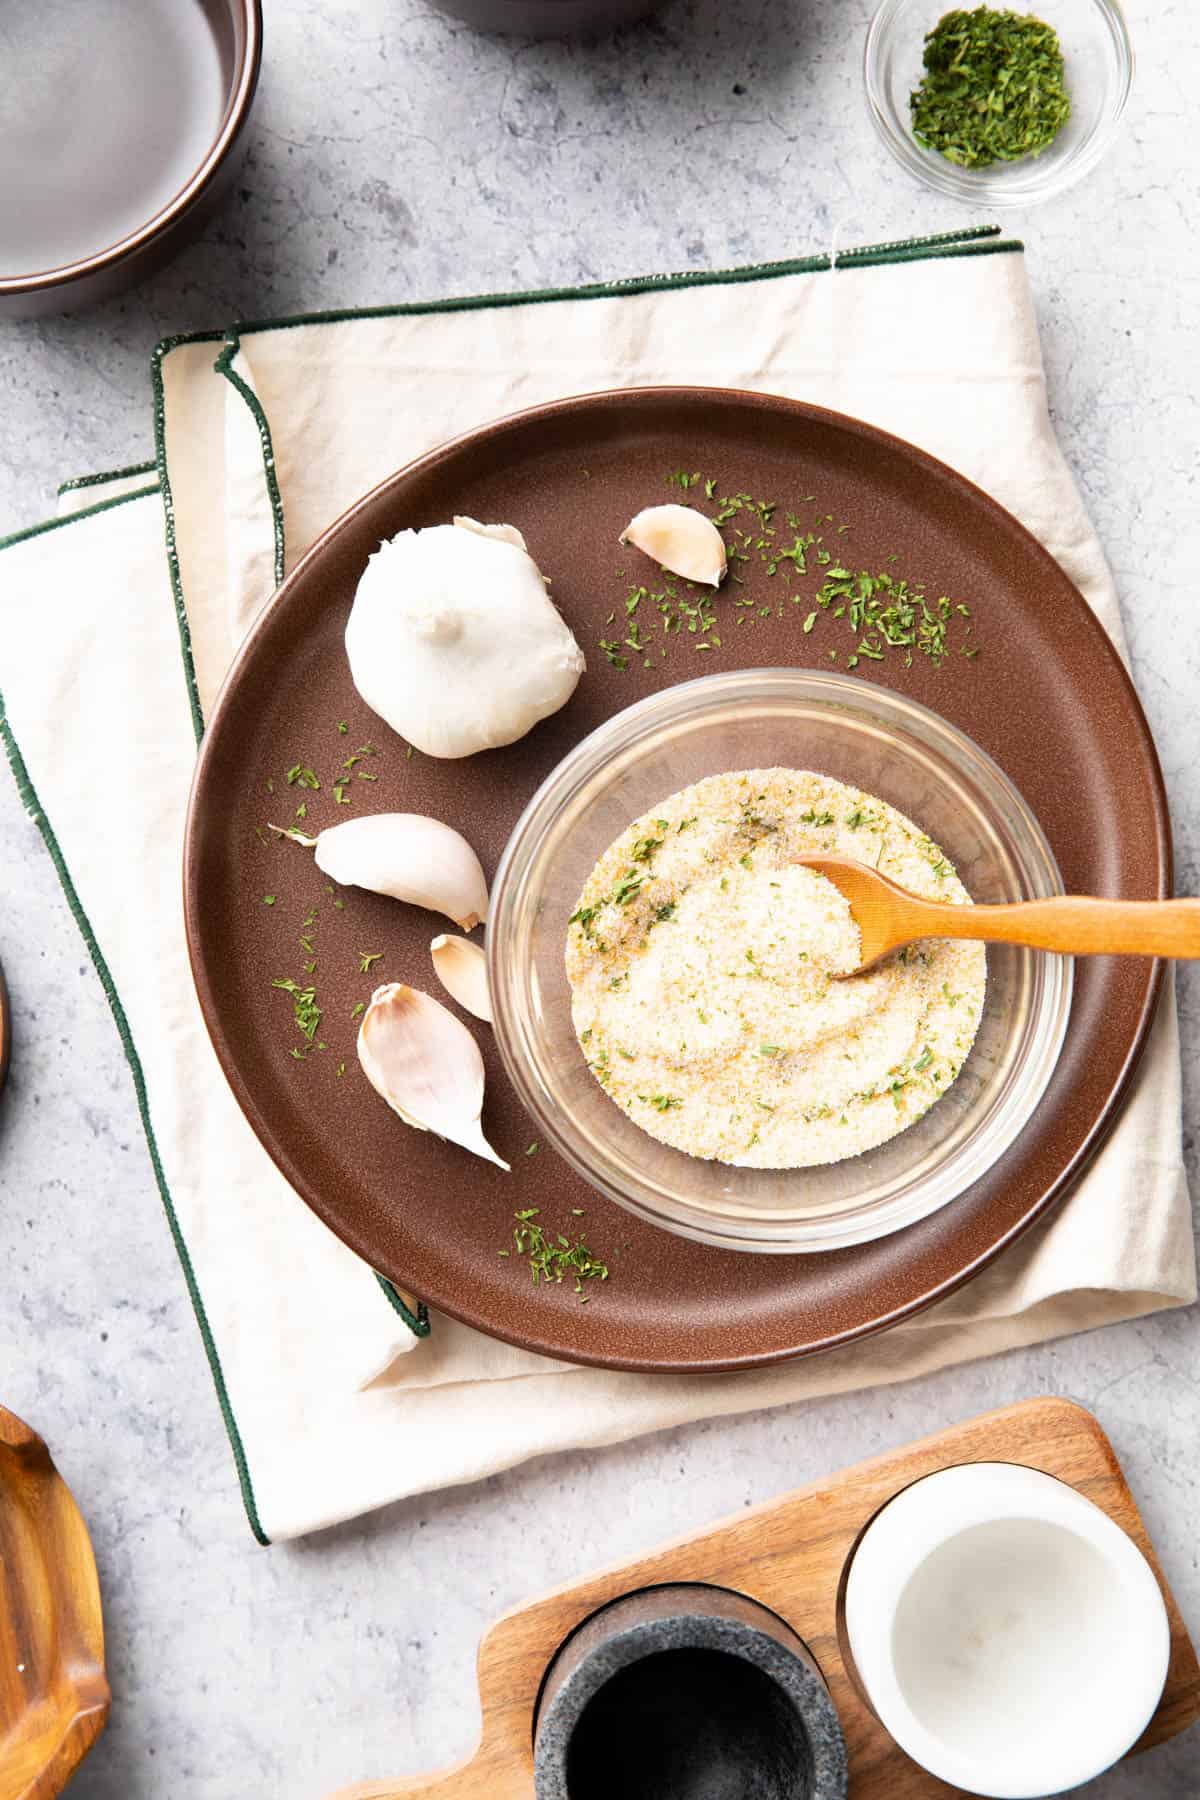 Garlic Salt in a Glass Bowl with a spoon